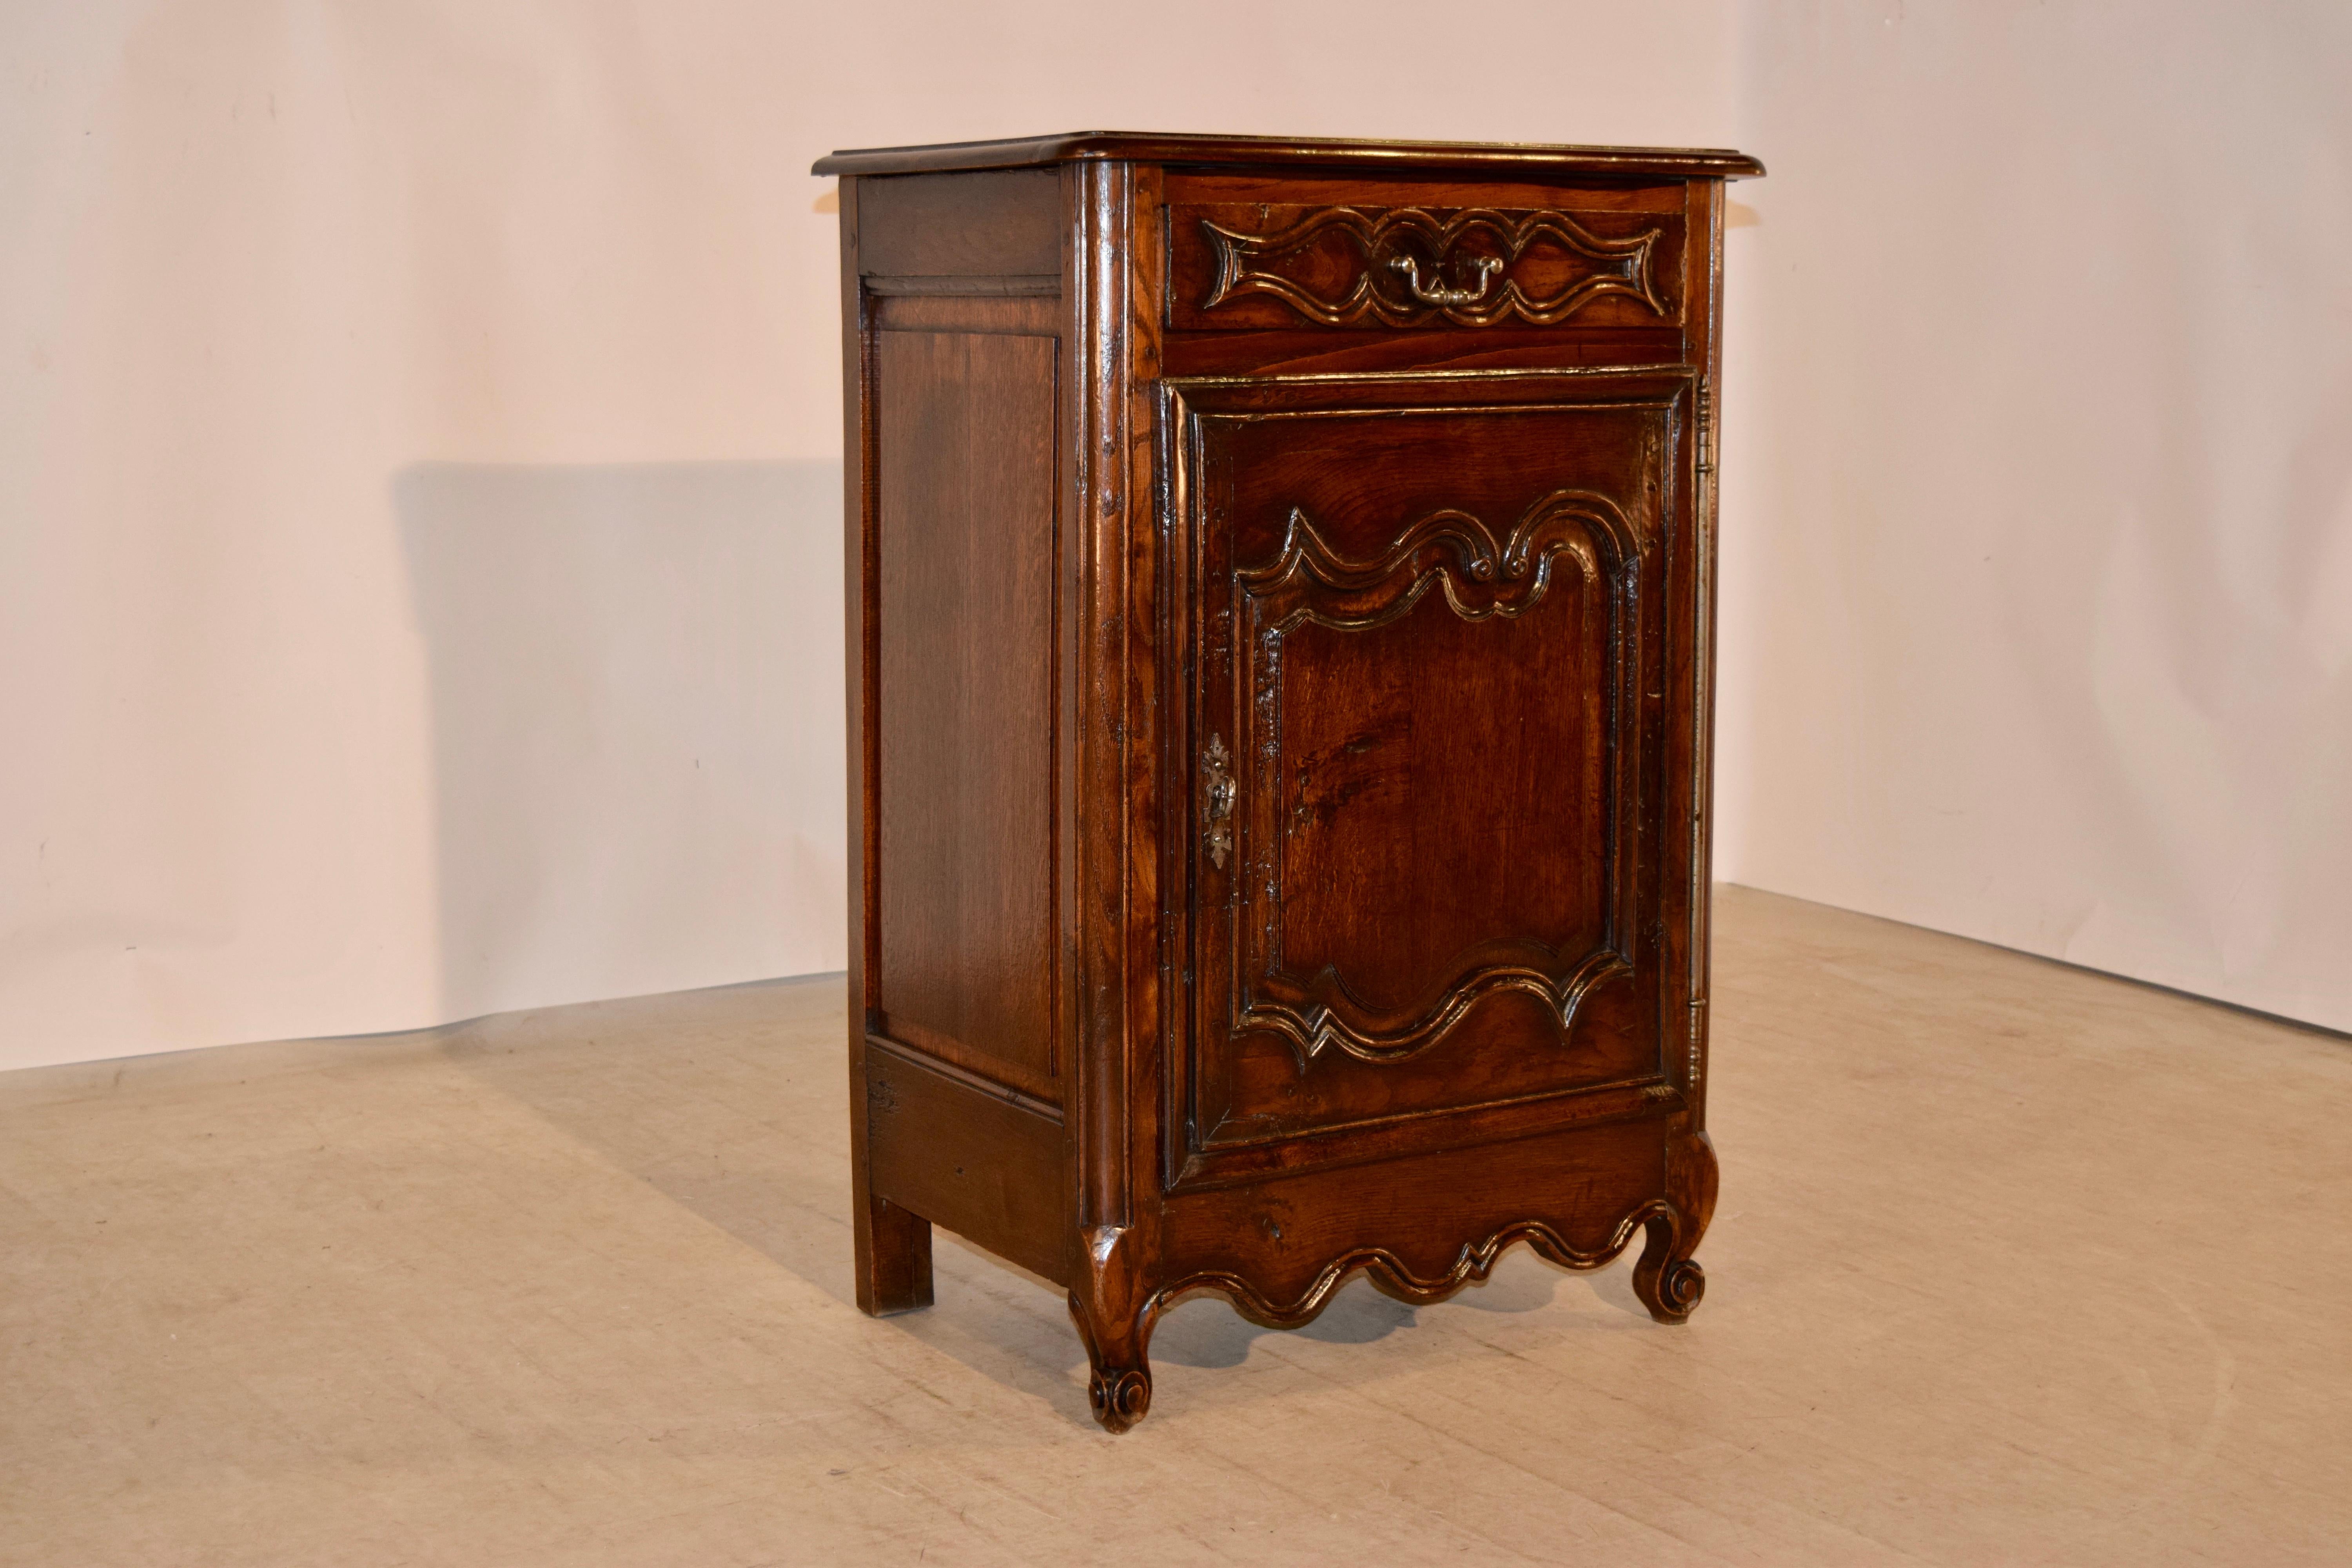 19th century cabinet from France made from oak. The top is banded and has a bevelled edge following down to a single drawer in the front over a single door, which opens to reveal storage. The drawer front and door are hand carved raised panelled.